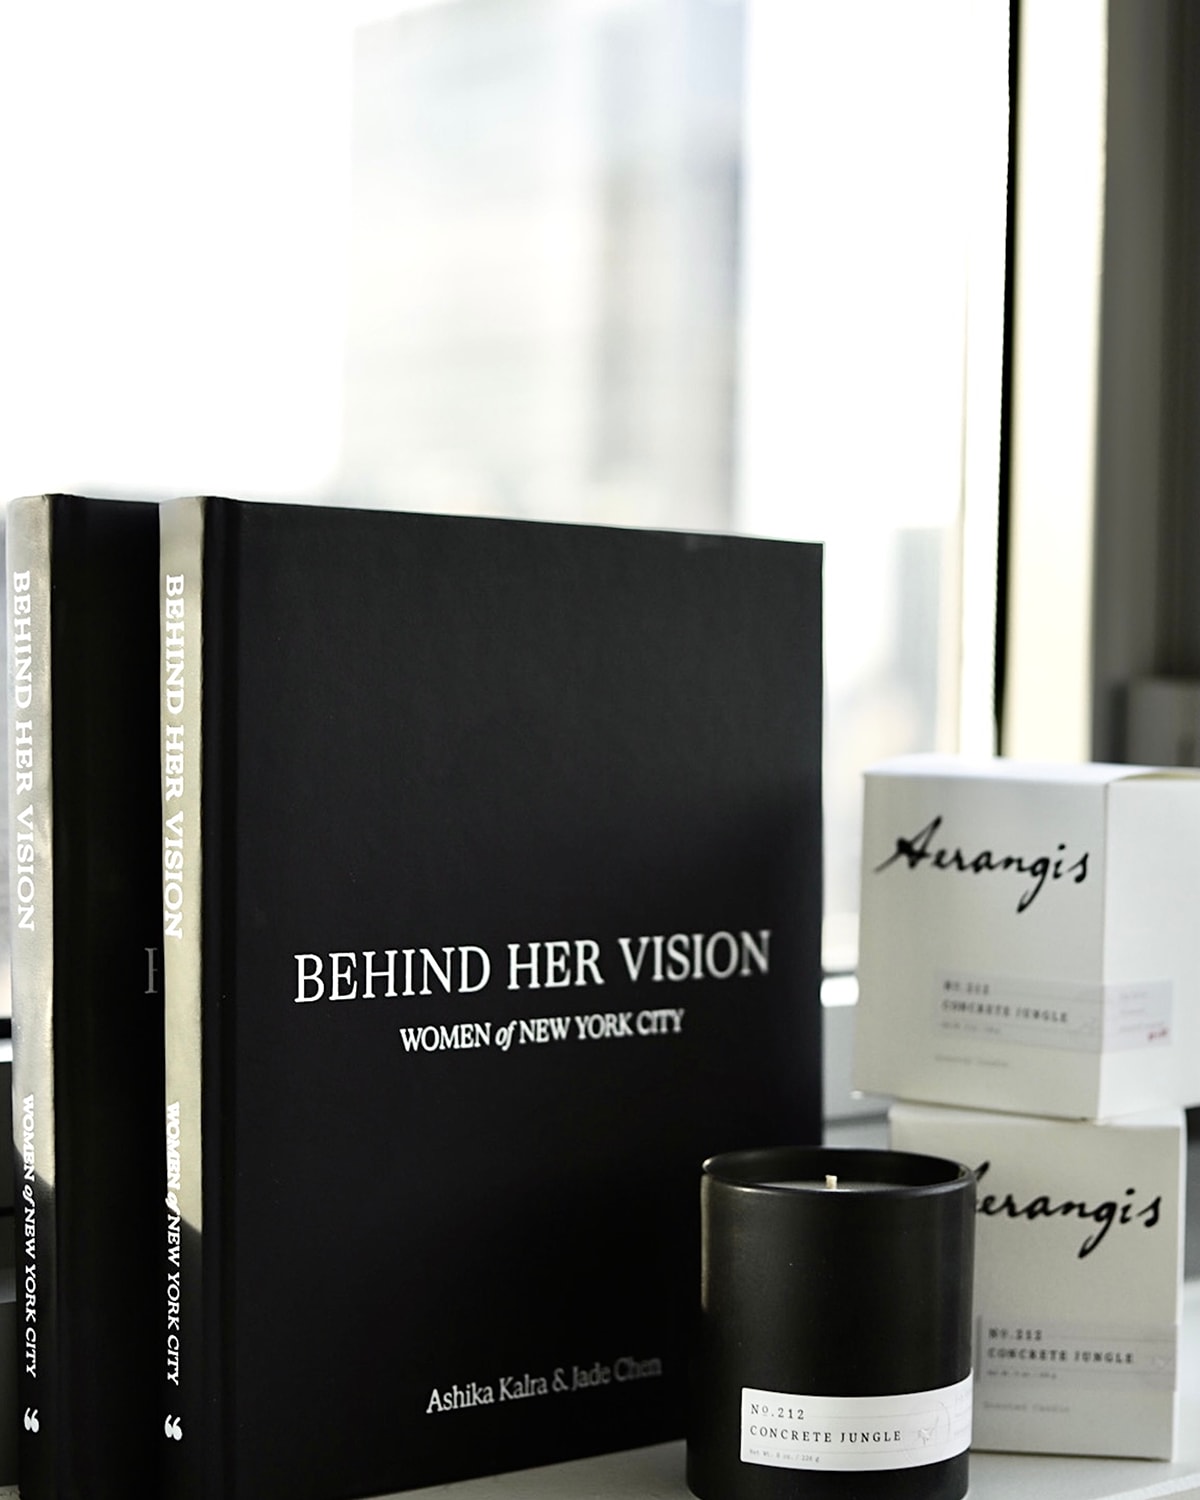 Shop Aerangis Stories Of New York Candle & Book Gift Set